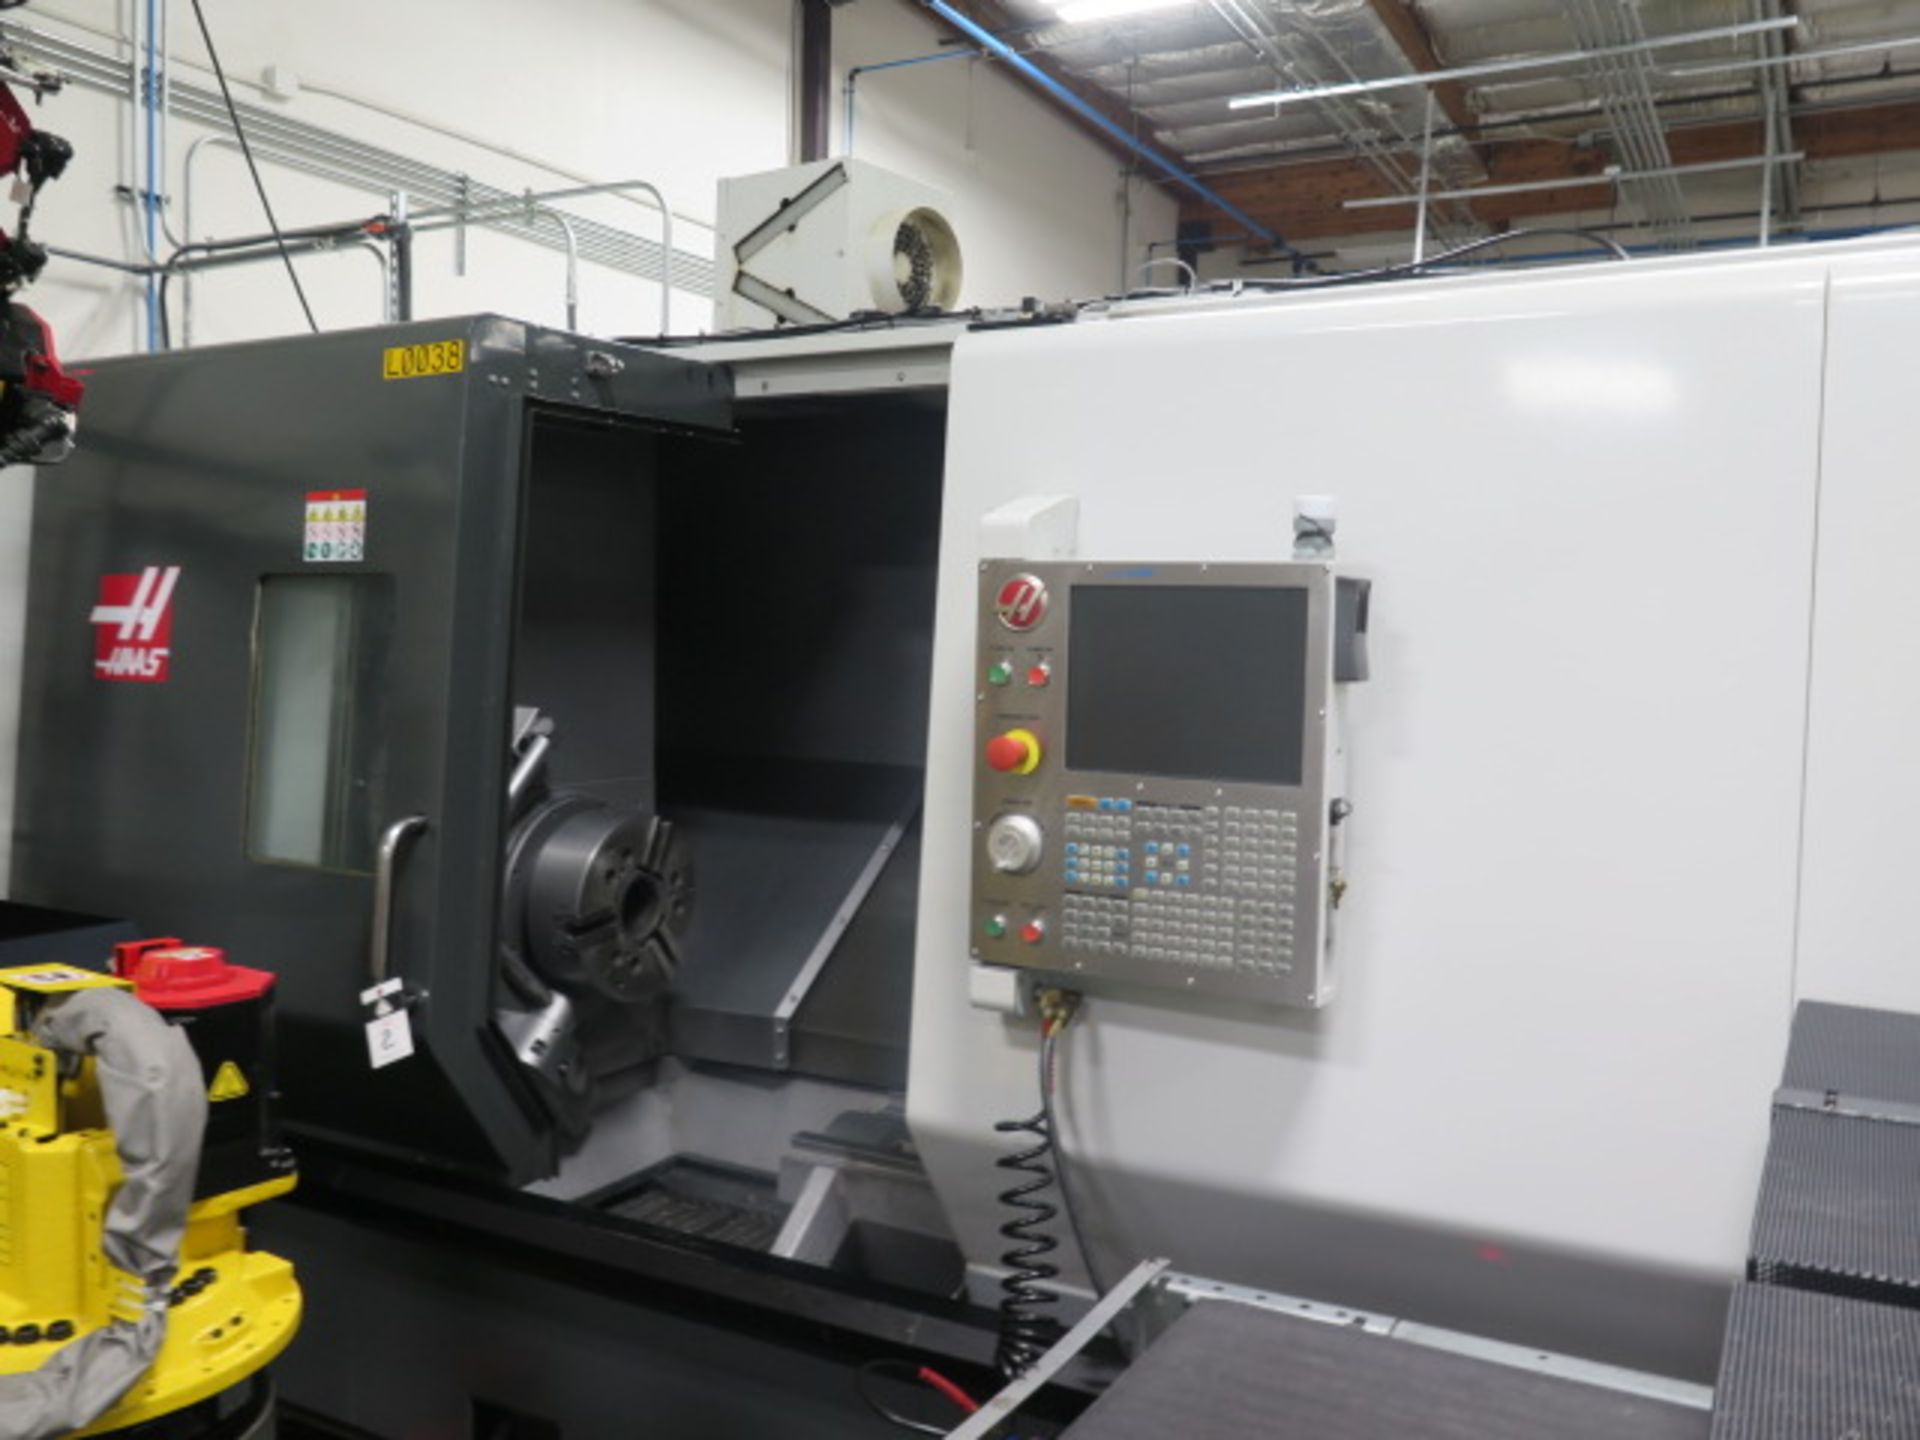 State of The Art” Mazak & Haas Semi Conductor MFG Facility - Image 6 of 8